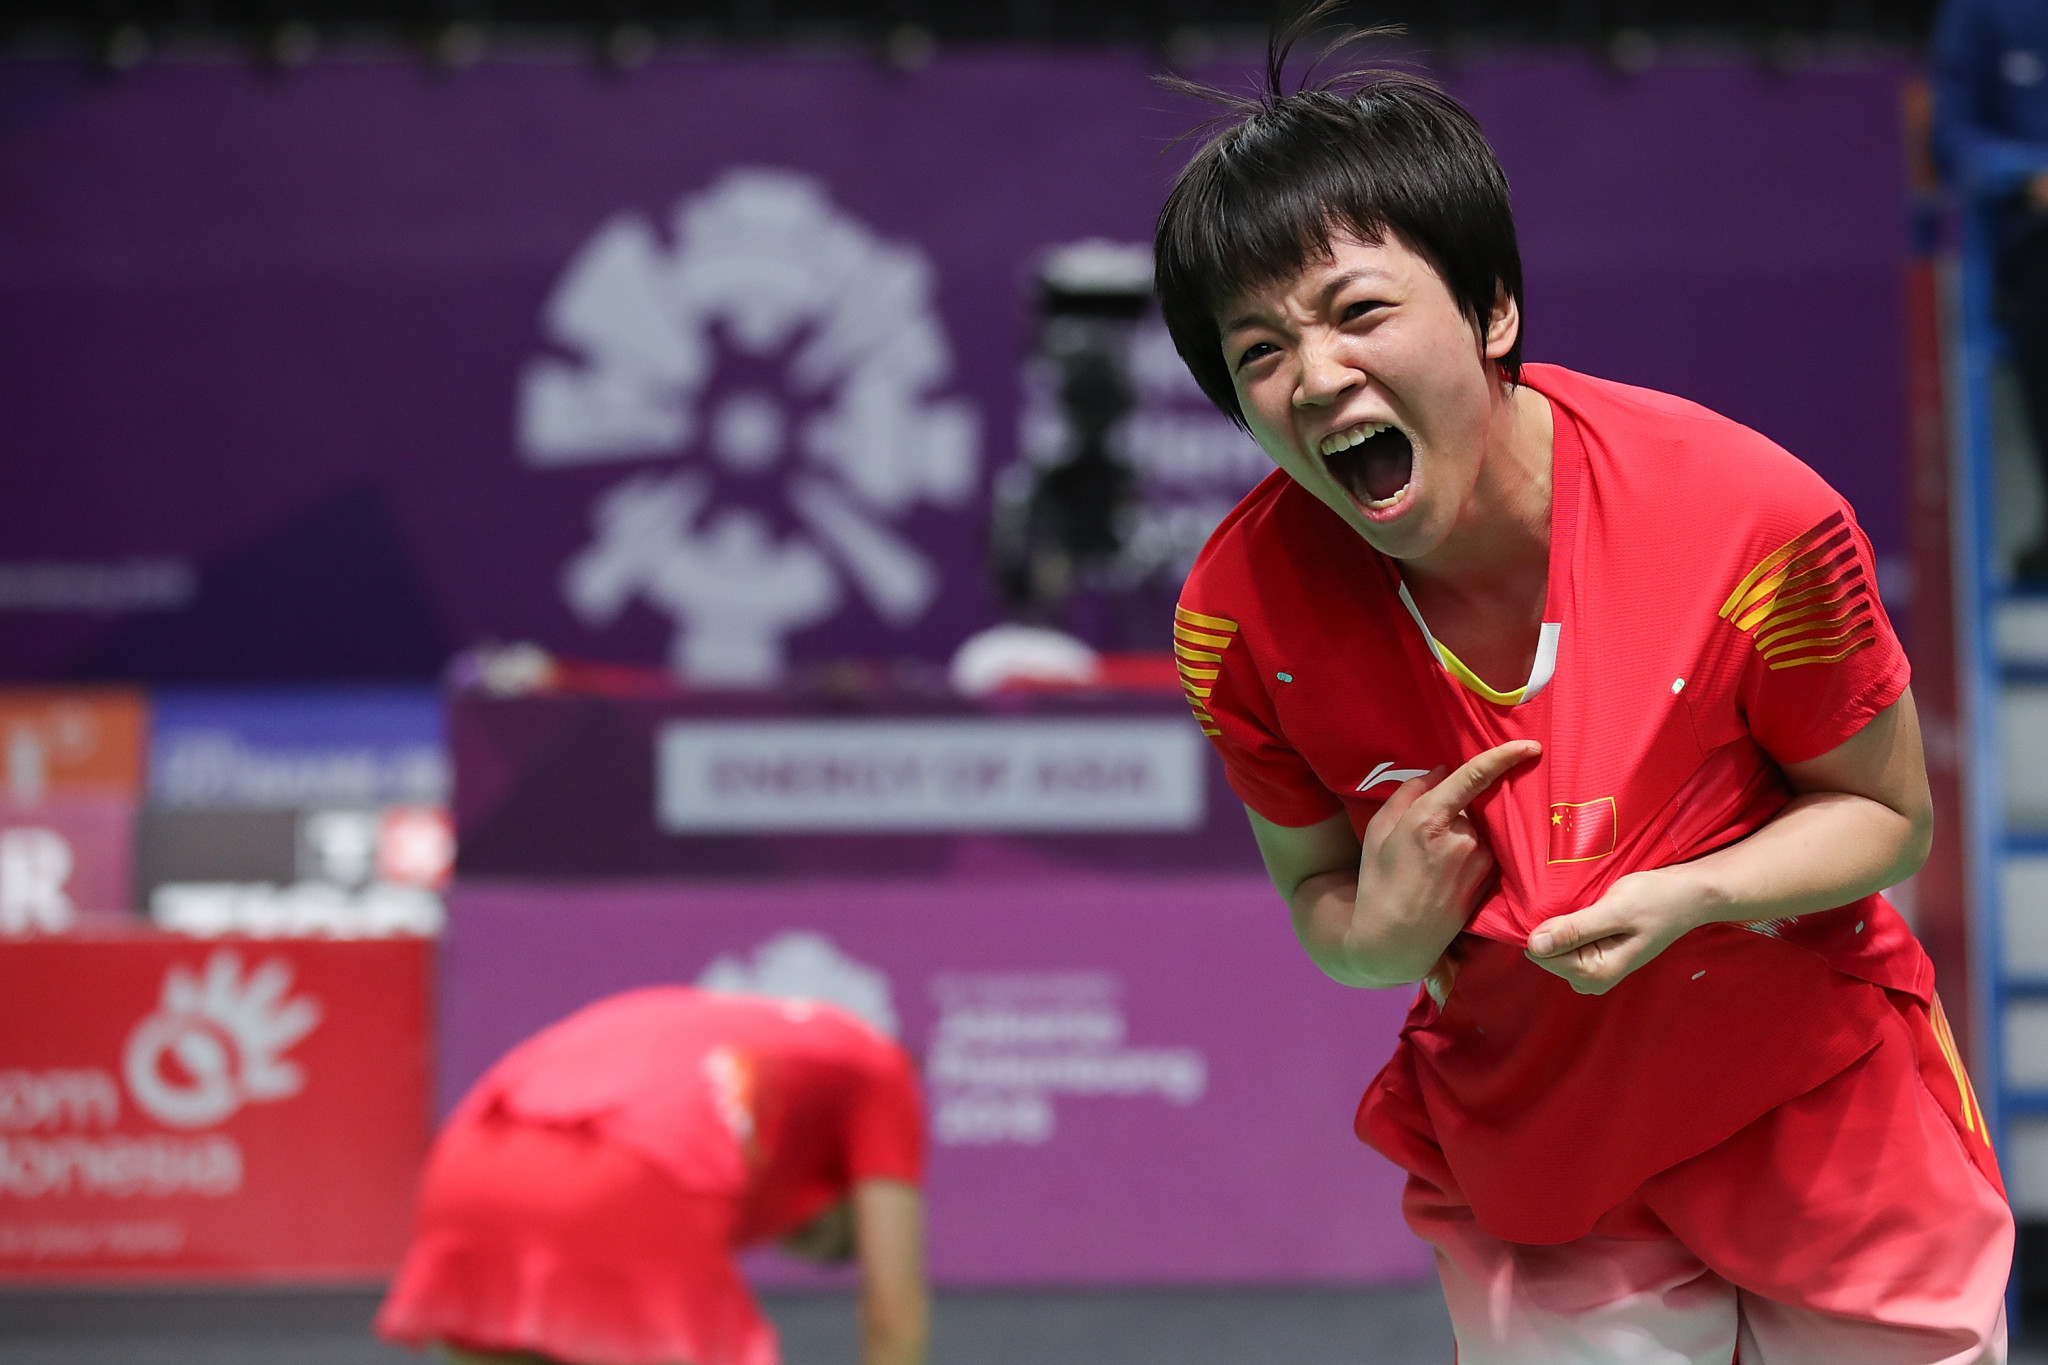 Qingchen Chen and Yifan Jia won a tight women's doubles final 22-20, 22-20 to win their country's seventh Asian Games gold in the event ©Getty Images